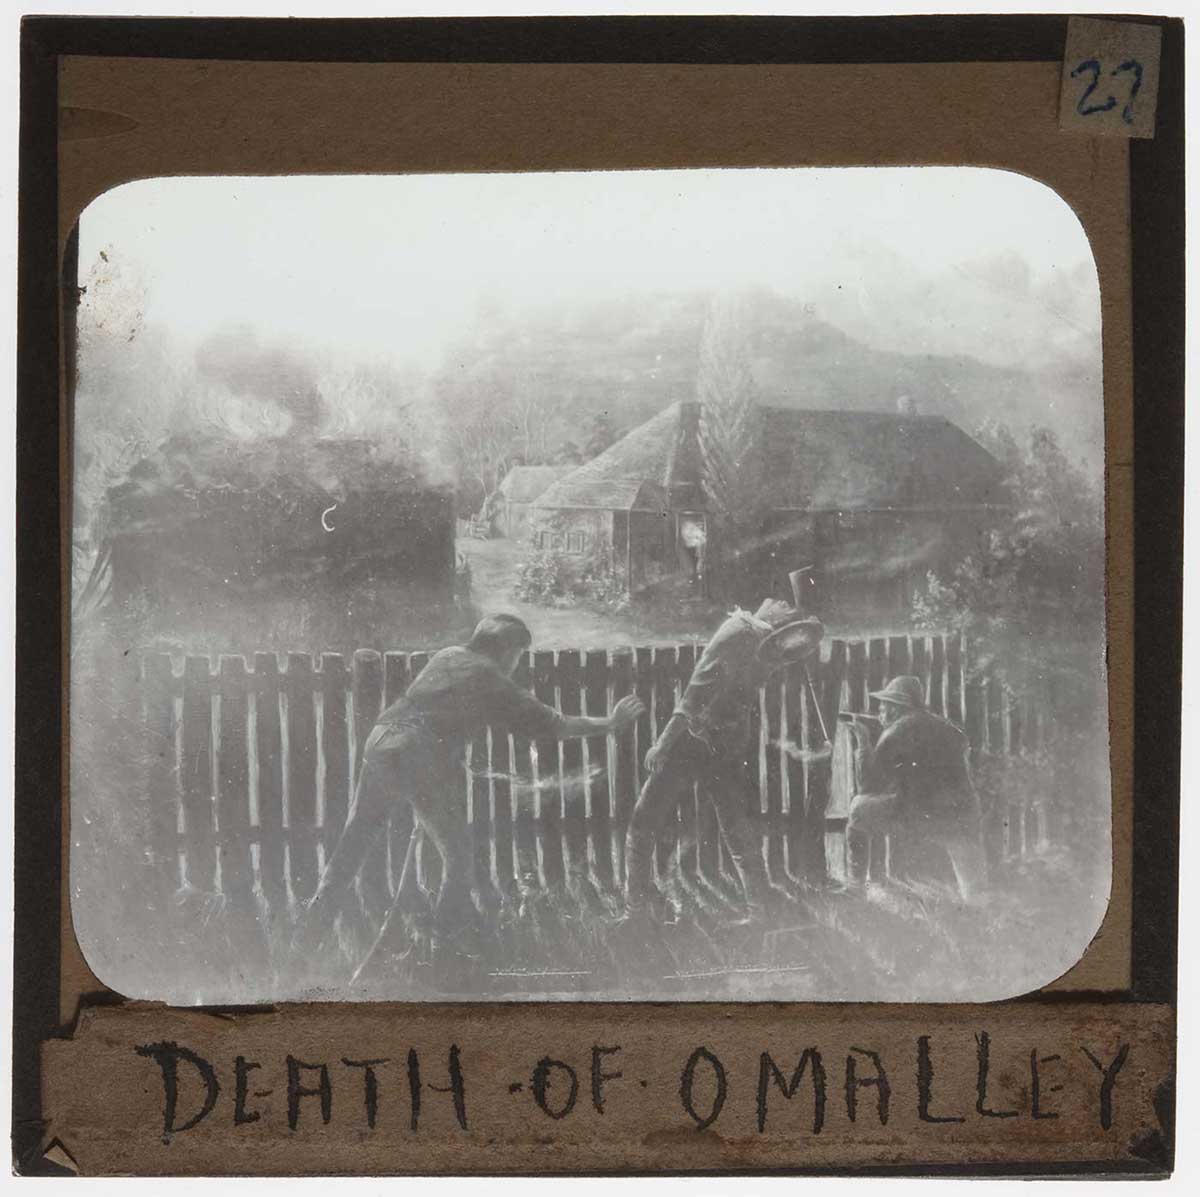 Black and white image of three men crouching behind a fence. The man at centre is reeling backwards. A building burns in the distance. 'DEATH OF O'MALLEY' is handwritten at the bottom of the slide. - click to view larger image